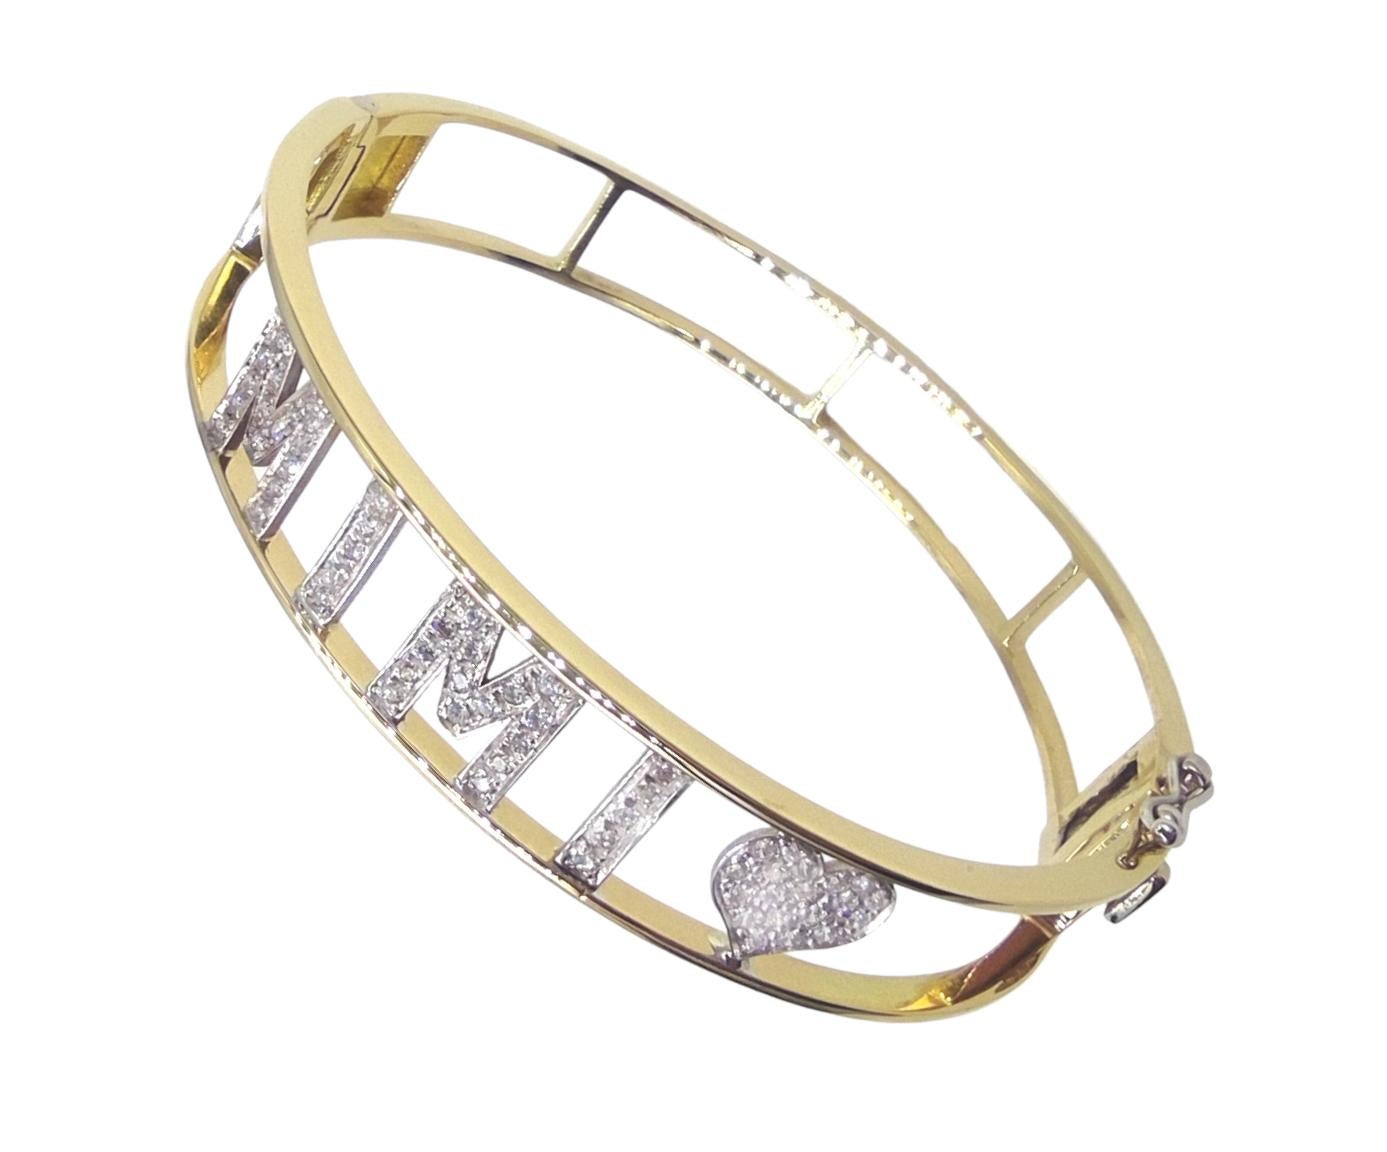 An exquisite handmade 18 carats yellow gold bracelet made by Antinori di Sanpietro 

100% made in Italy 

All diamonds are natural E-F color and excellent brightness

The bracelet is customizable it can be done in pink and yellow gold. 
The name or